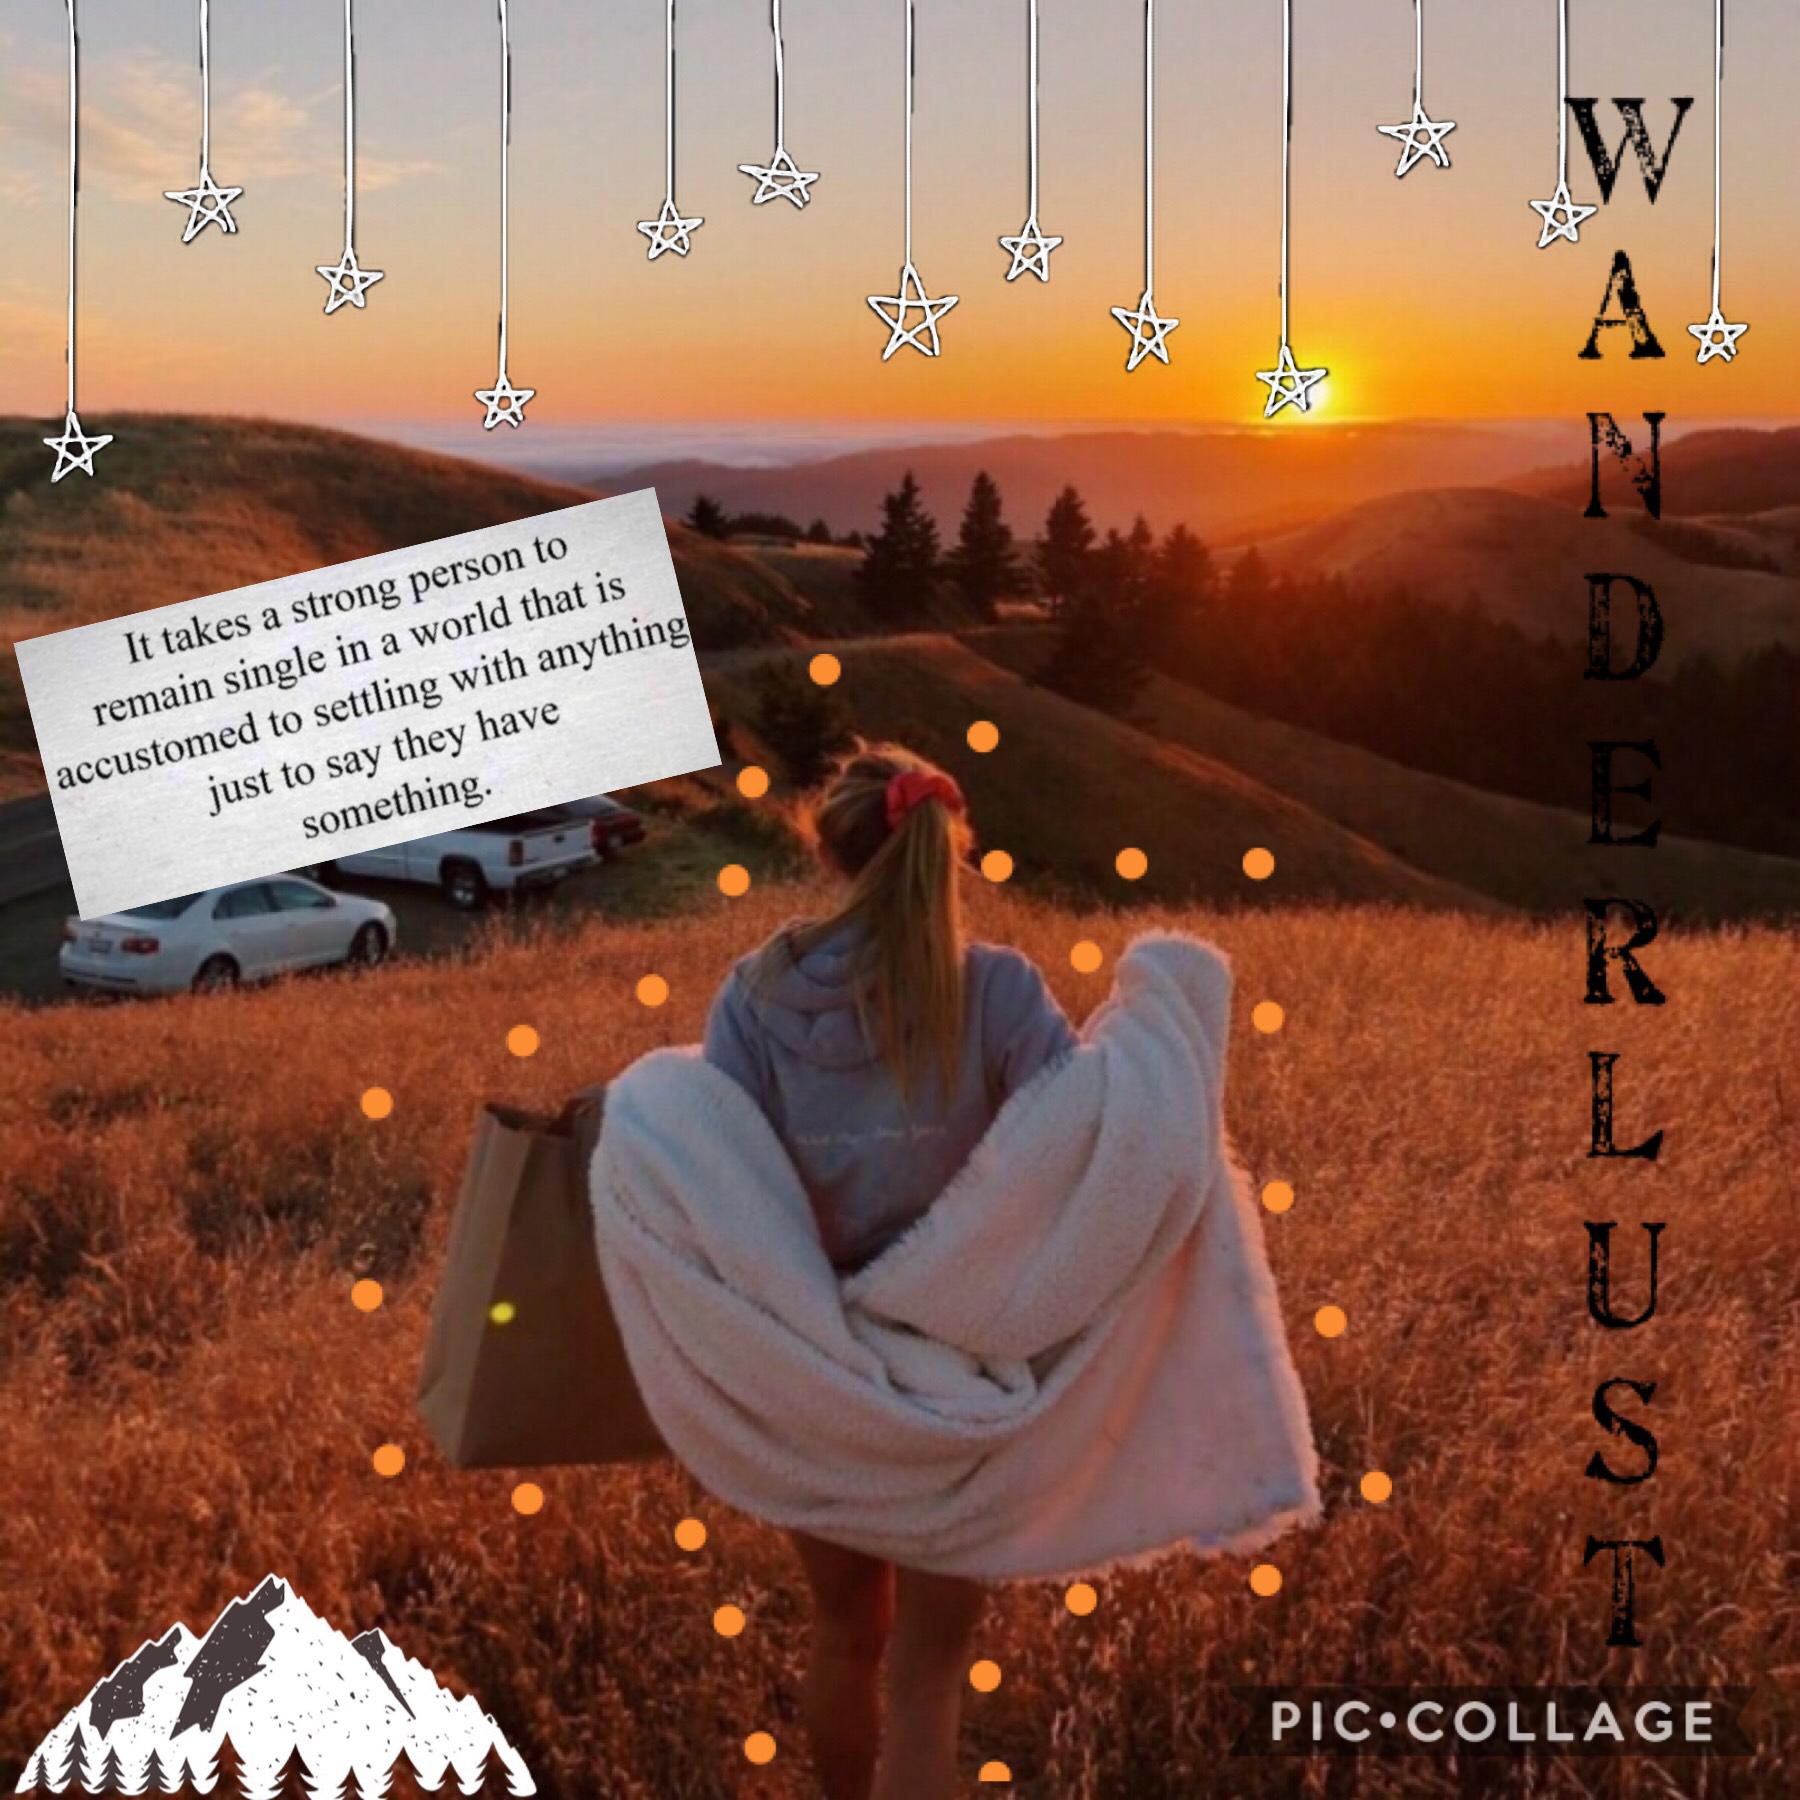 wanderlust🧡
i love this so much